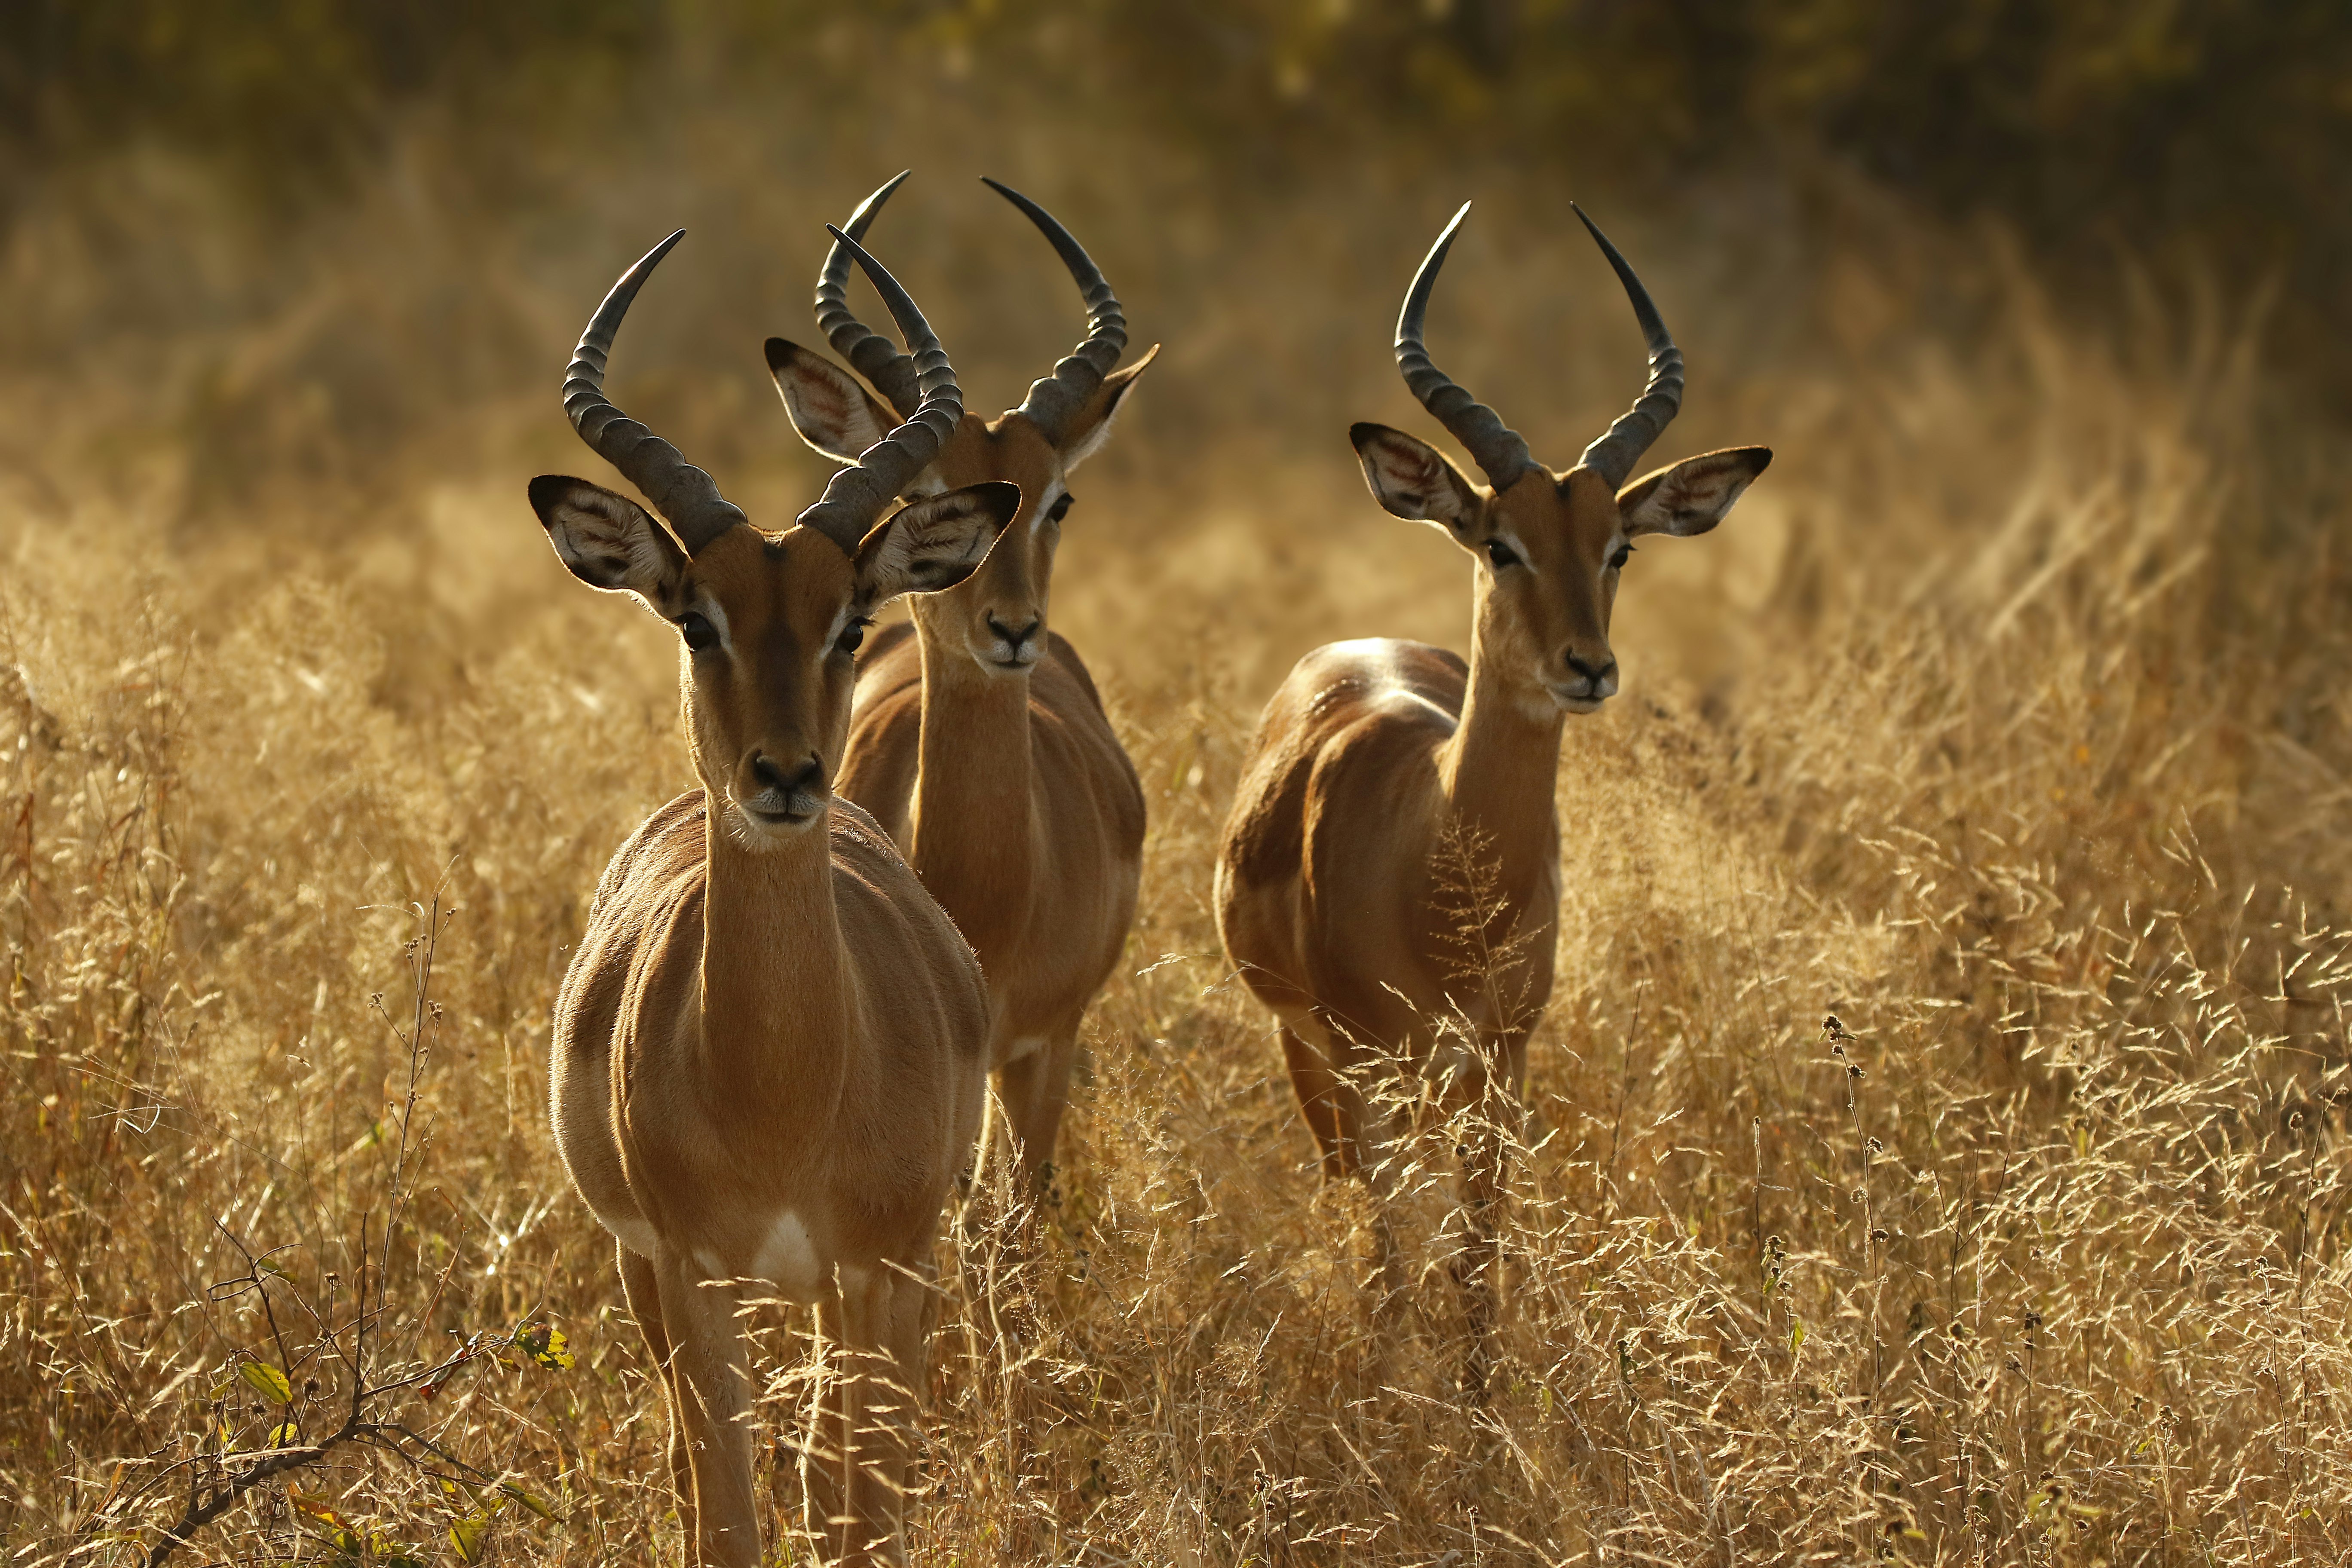 Africa's impala is an antelope, quite different from Wyoming's pronghorn.